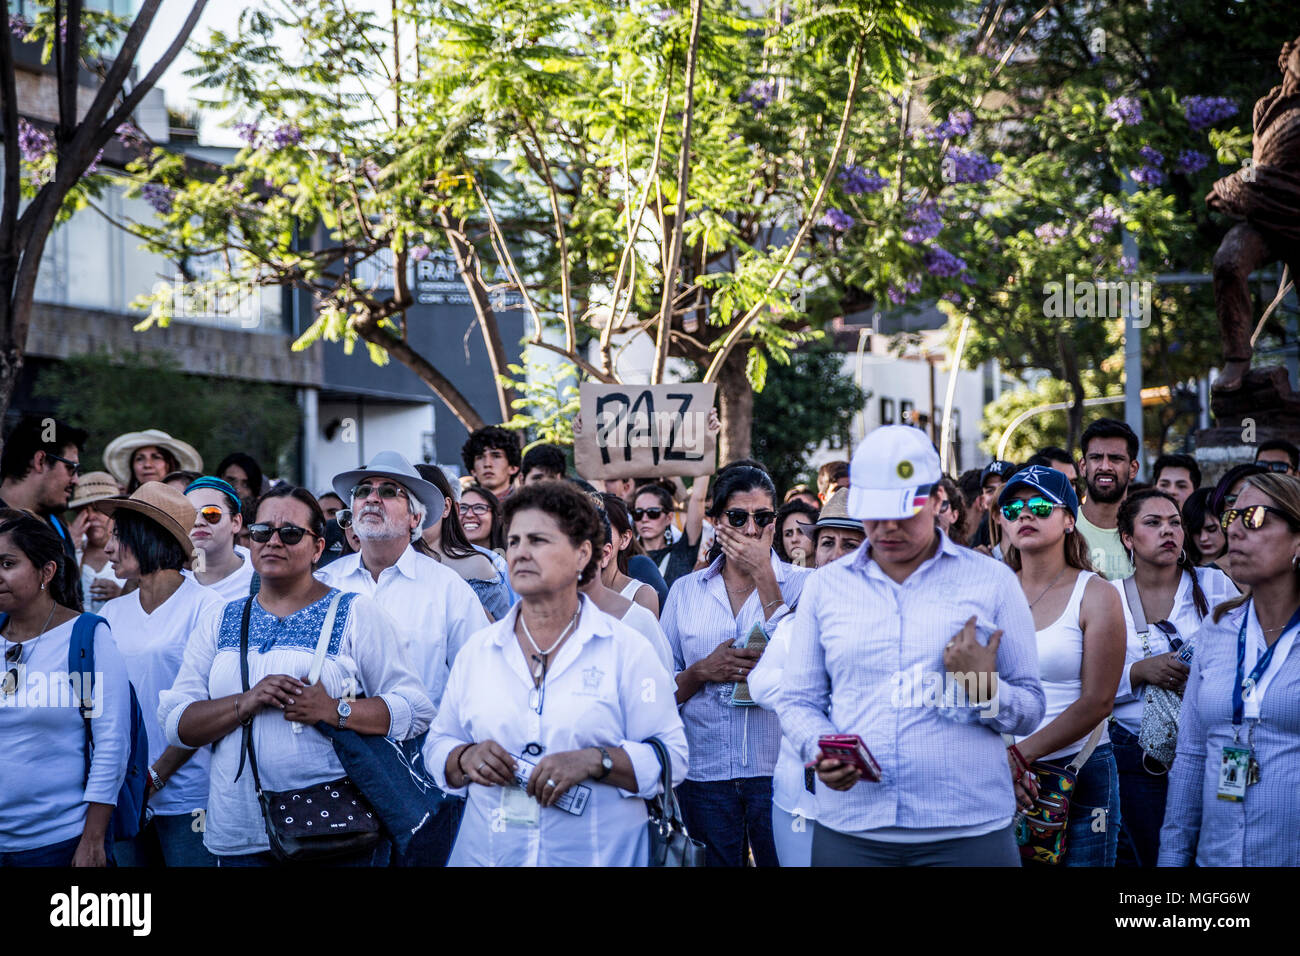 26 April 2018, Mexico, Guadalajara: Demonstrators take to the streets with one of them carring a hand-written sign which reads 'Paz' (peace) during a protest march following the murder of three film students. Mexico is currently experiencing an unprecedented surge in violence, marking 2017 the bloodiest year in the country's recent history with more than 29,000 homicides and around 30,000 people presumed missing. Photo: Toni Rodriguez/dpa Stock Photo